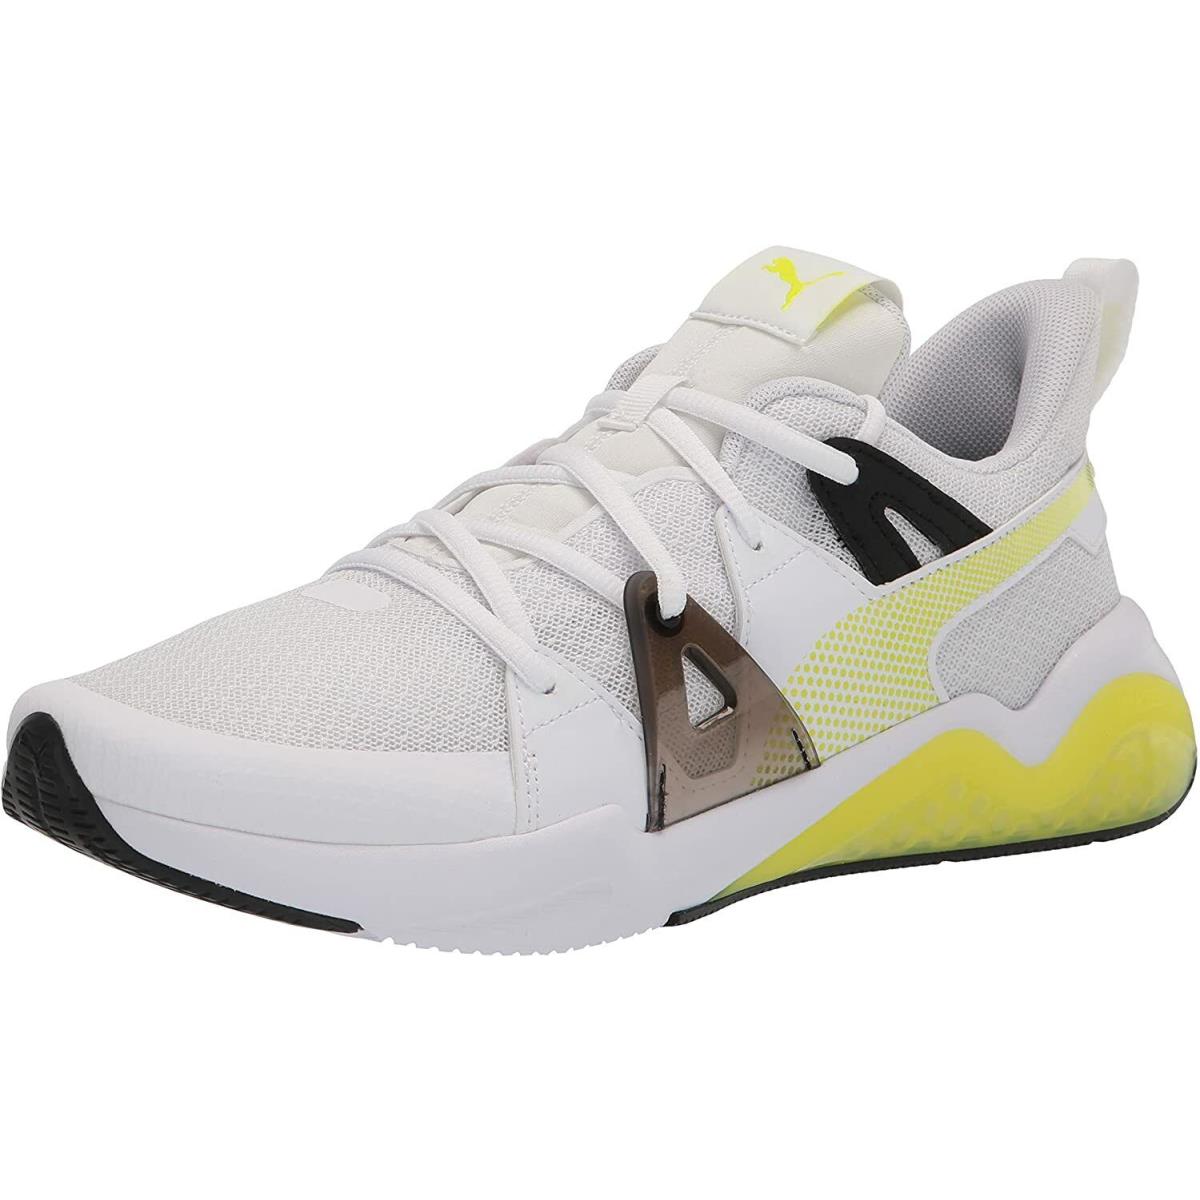 Puma Men`s Cell Fraction Running Shoes